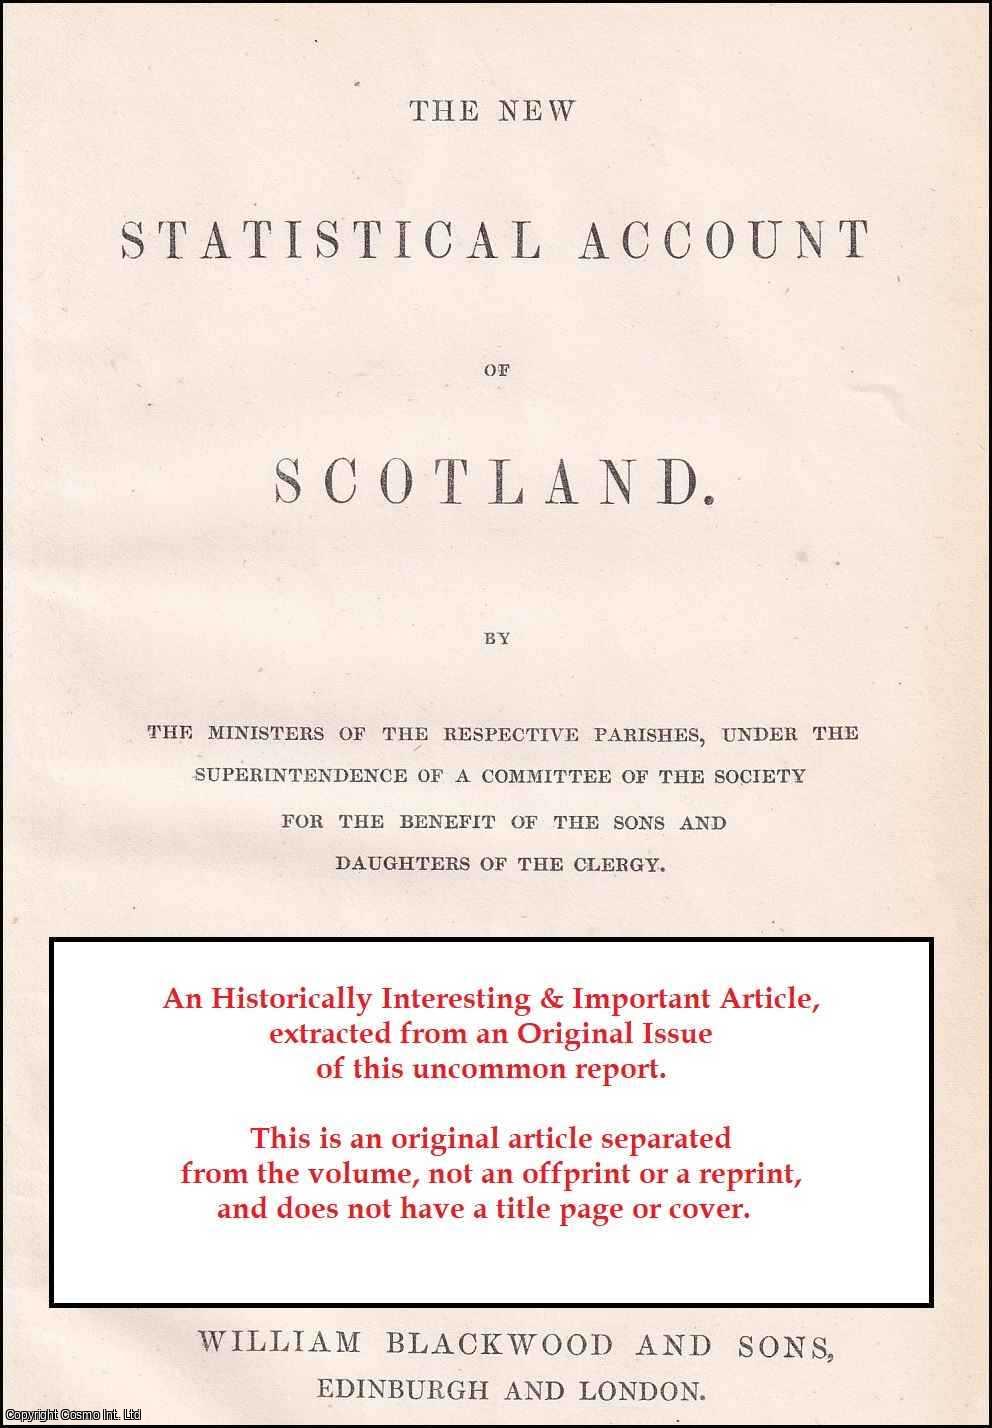 Rev. William M. Hetherington - Parish of Torphichen. Presbytery of Linlithgow, Synod of Lothian and Tweeddale. An uncommon original article from The New Statistical Account of Scotland, 1845.